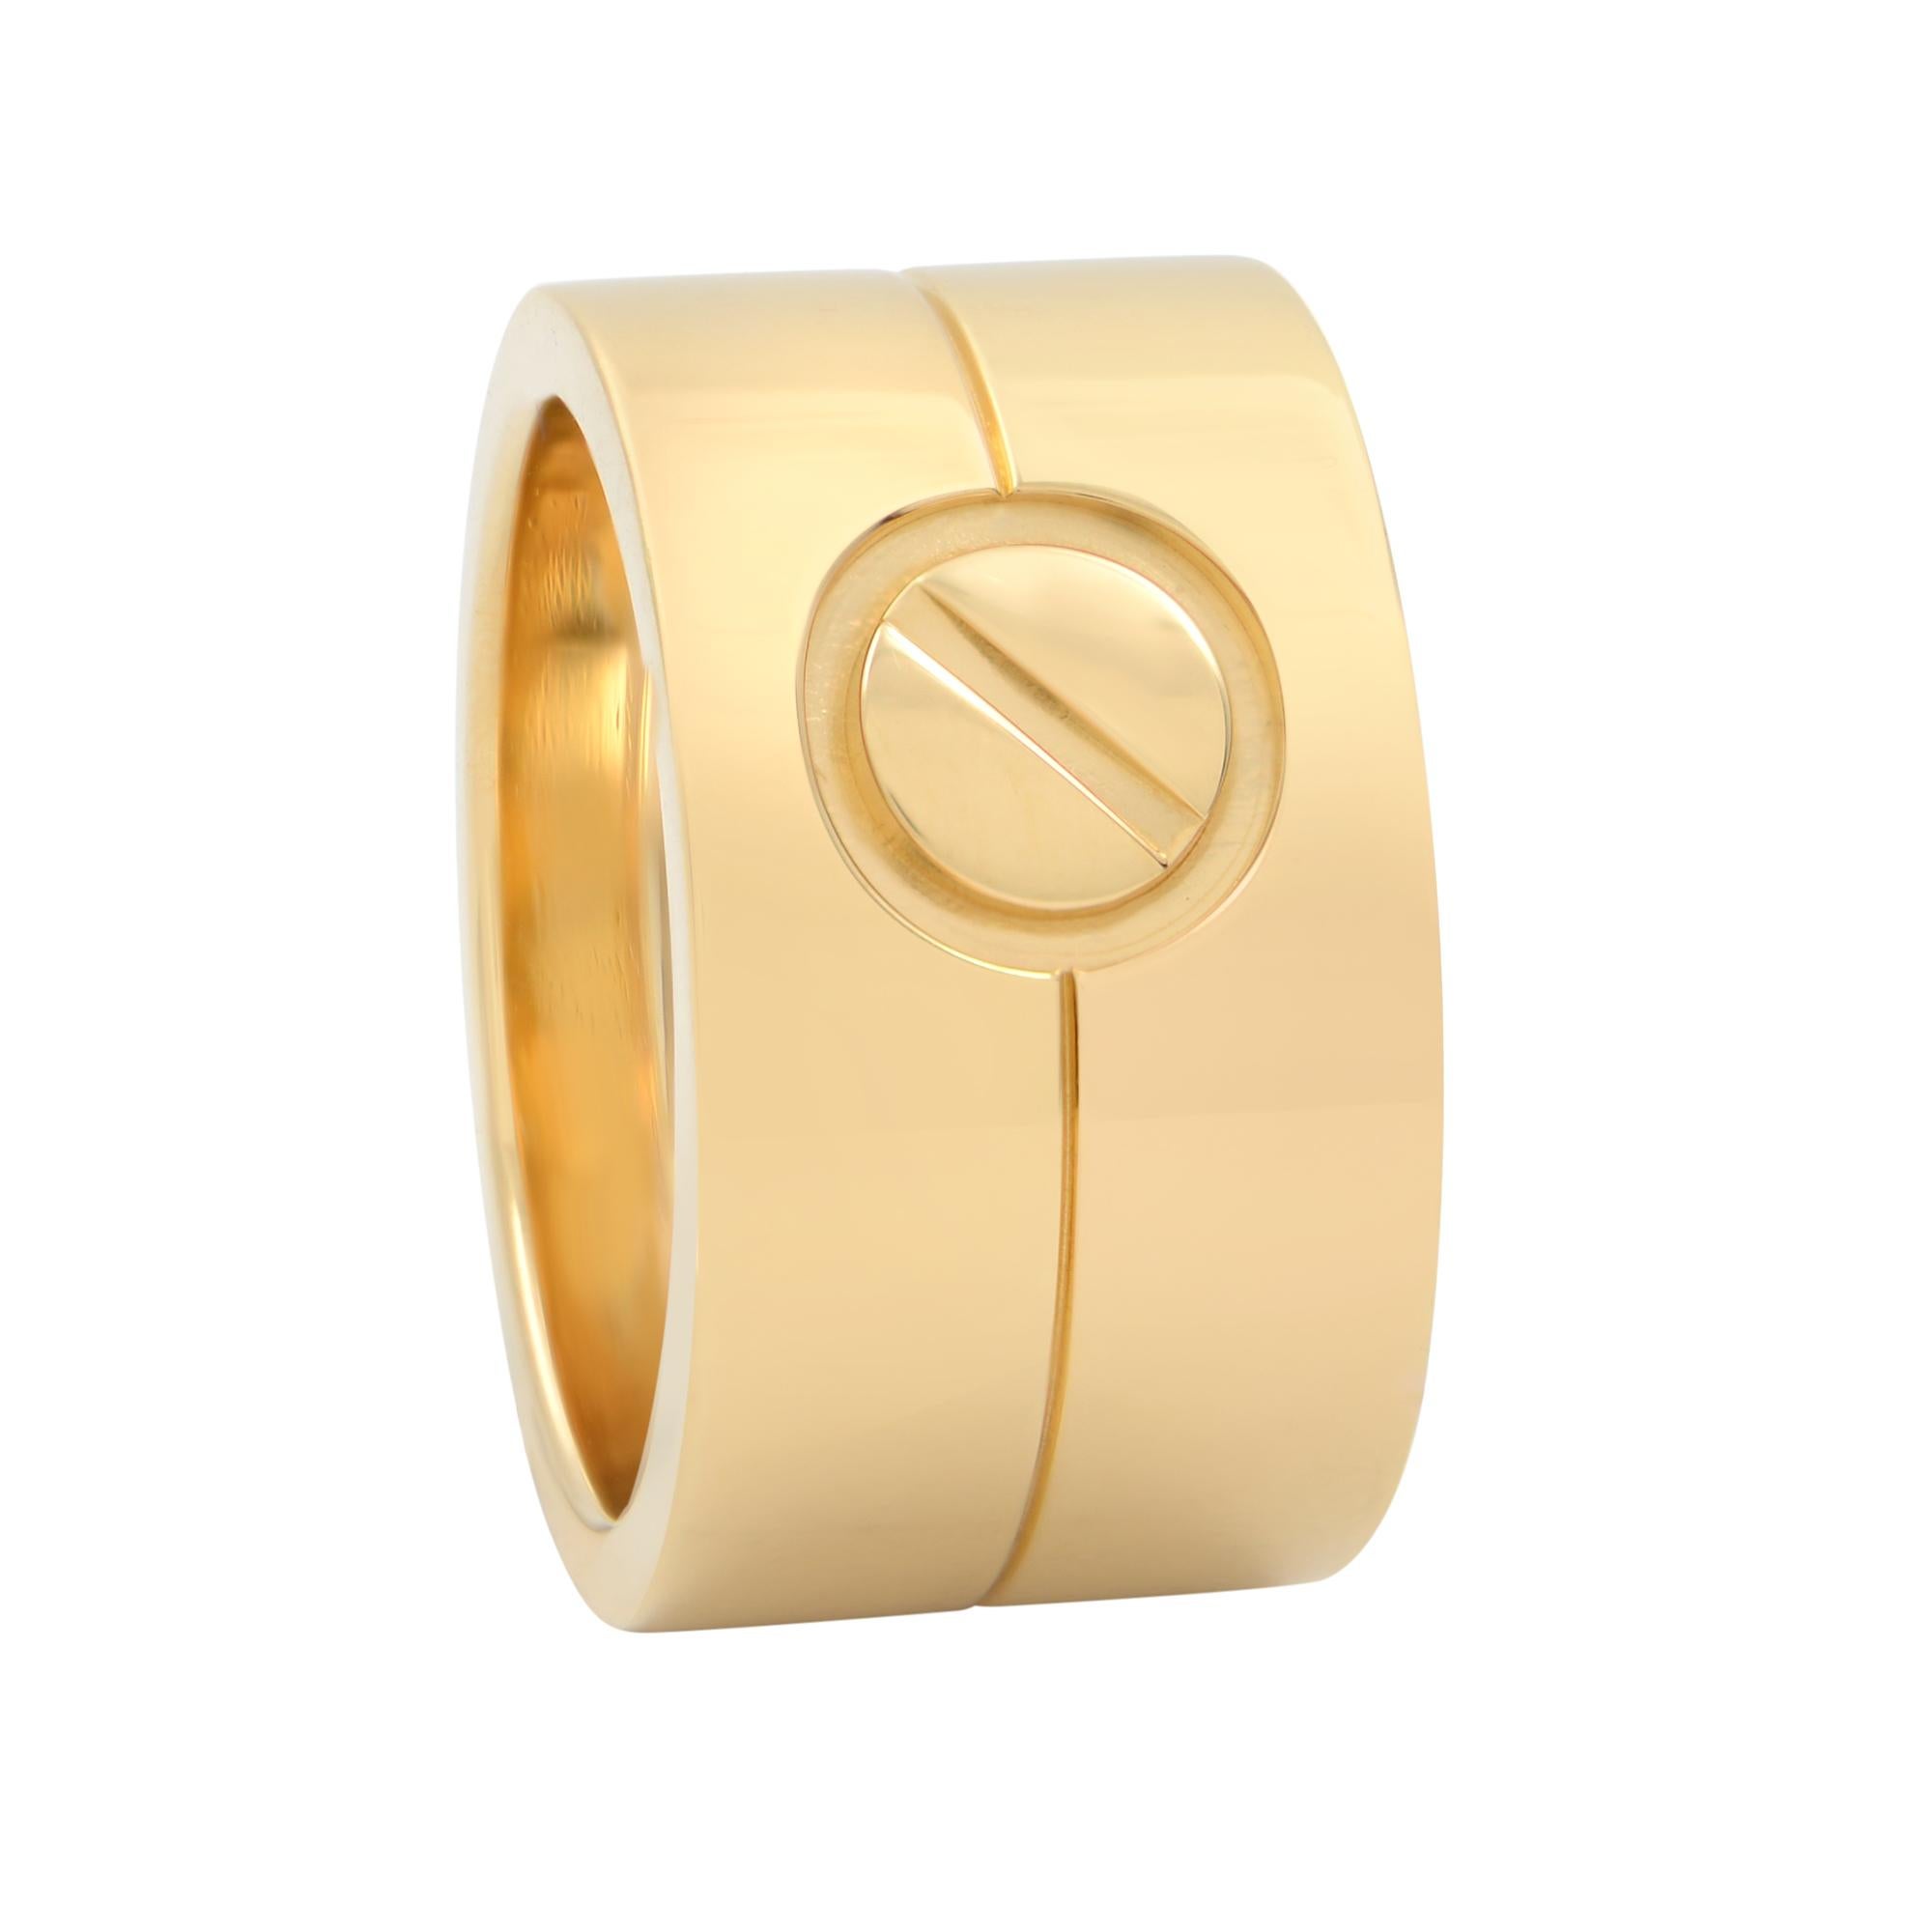 Cartier Love 18K yellow gold high ring Width: 10.80 mm. Thickness: 1.7 mm. Ring size 49 US 5. Hallmarked. Excellent pre-owned condition. Original Box and Papers are not included. 